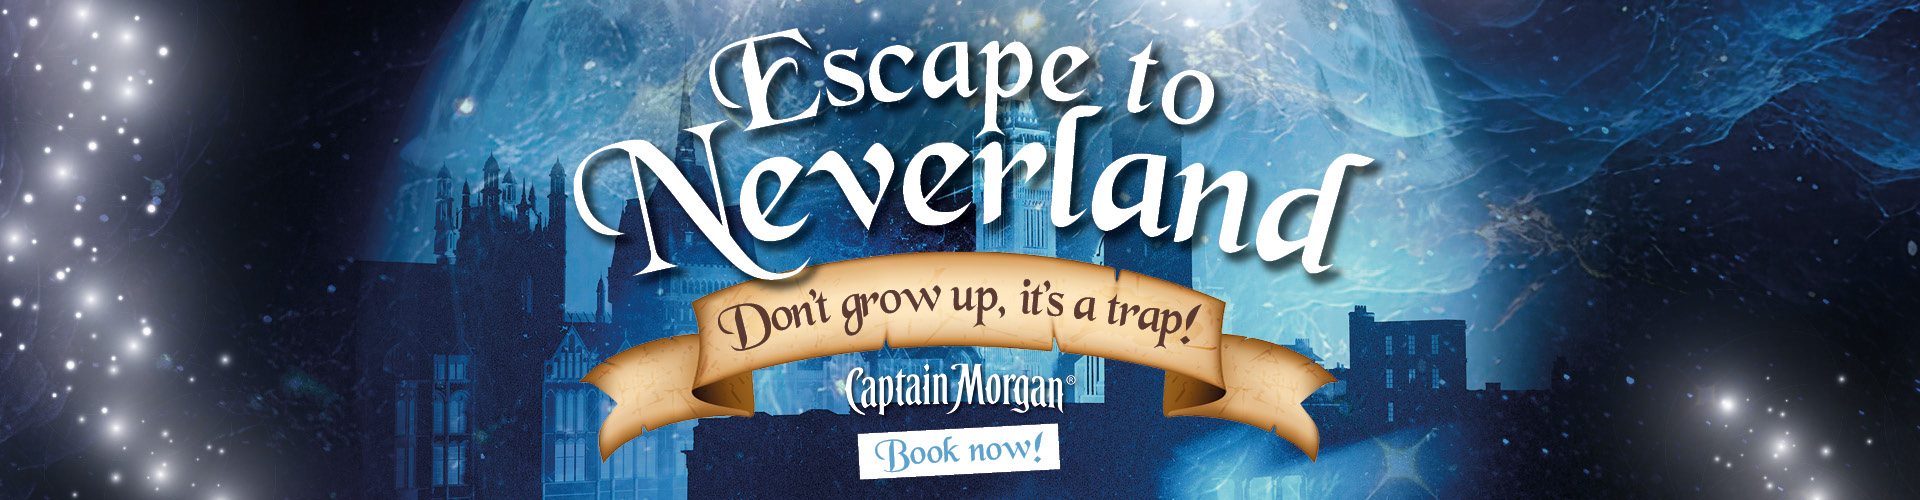 Escape to Neverland this NYE at Popworld Manchester